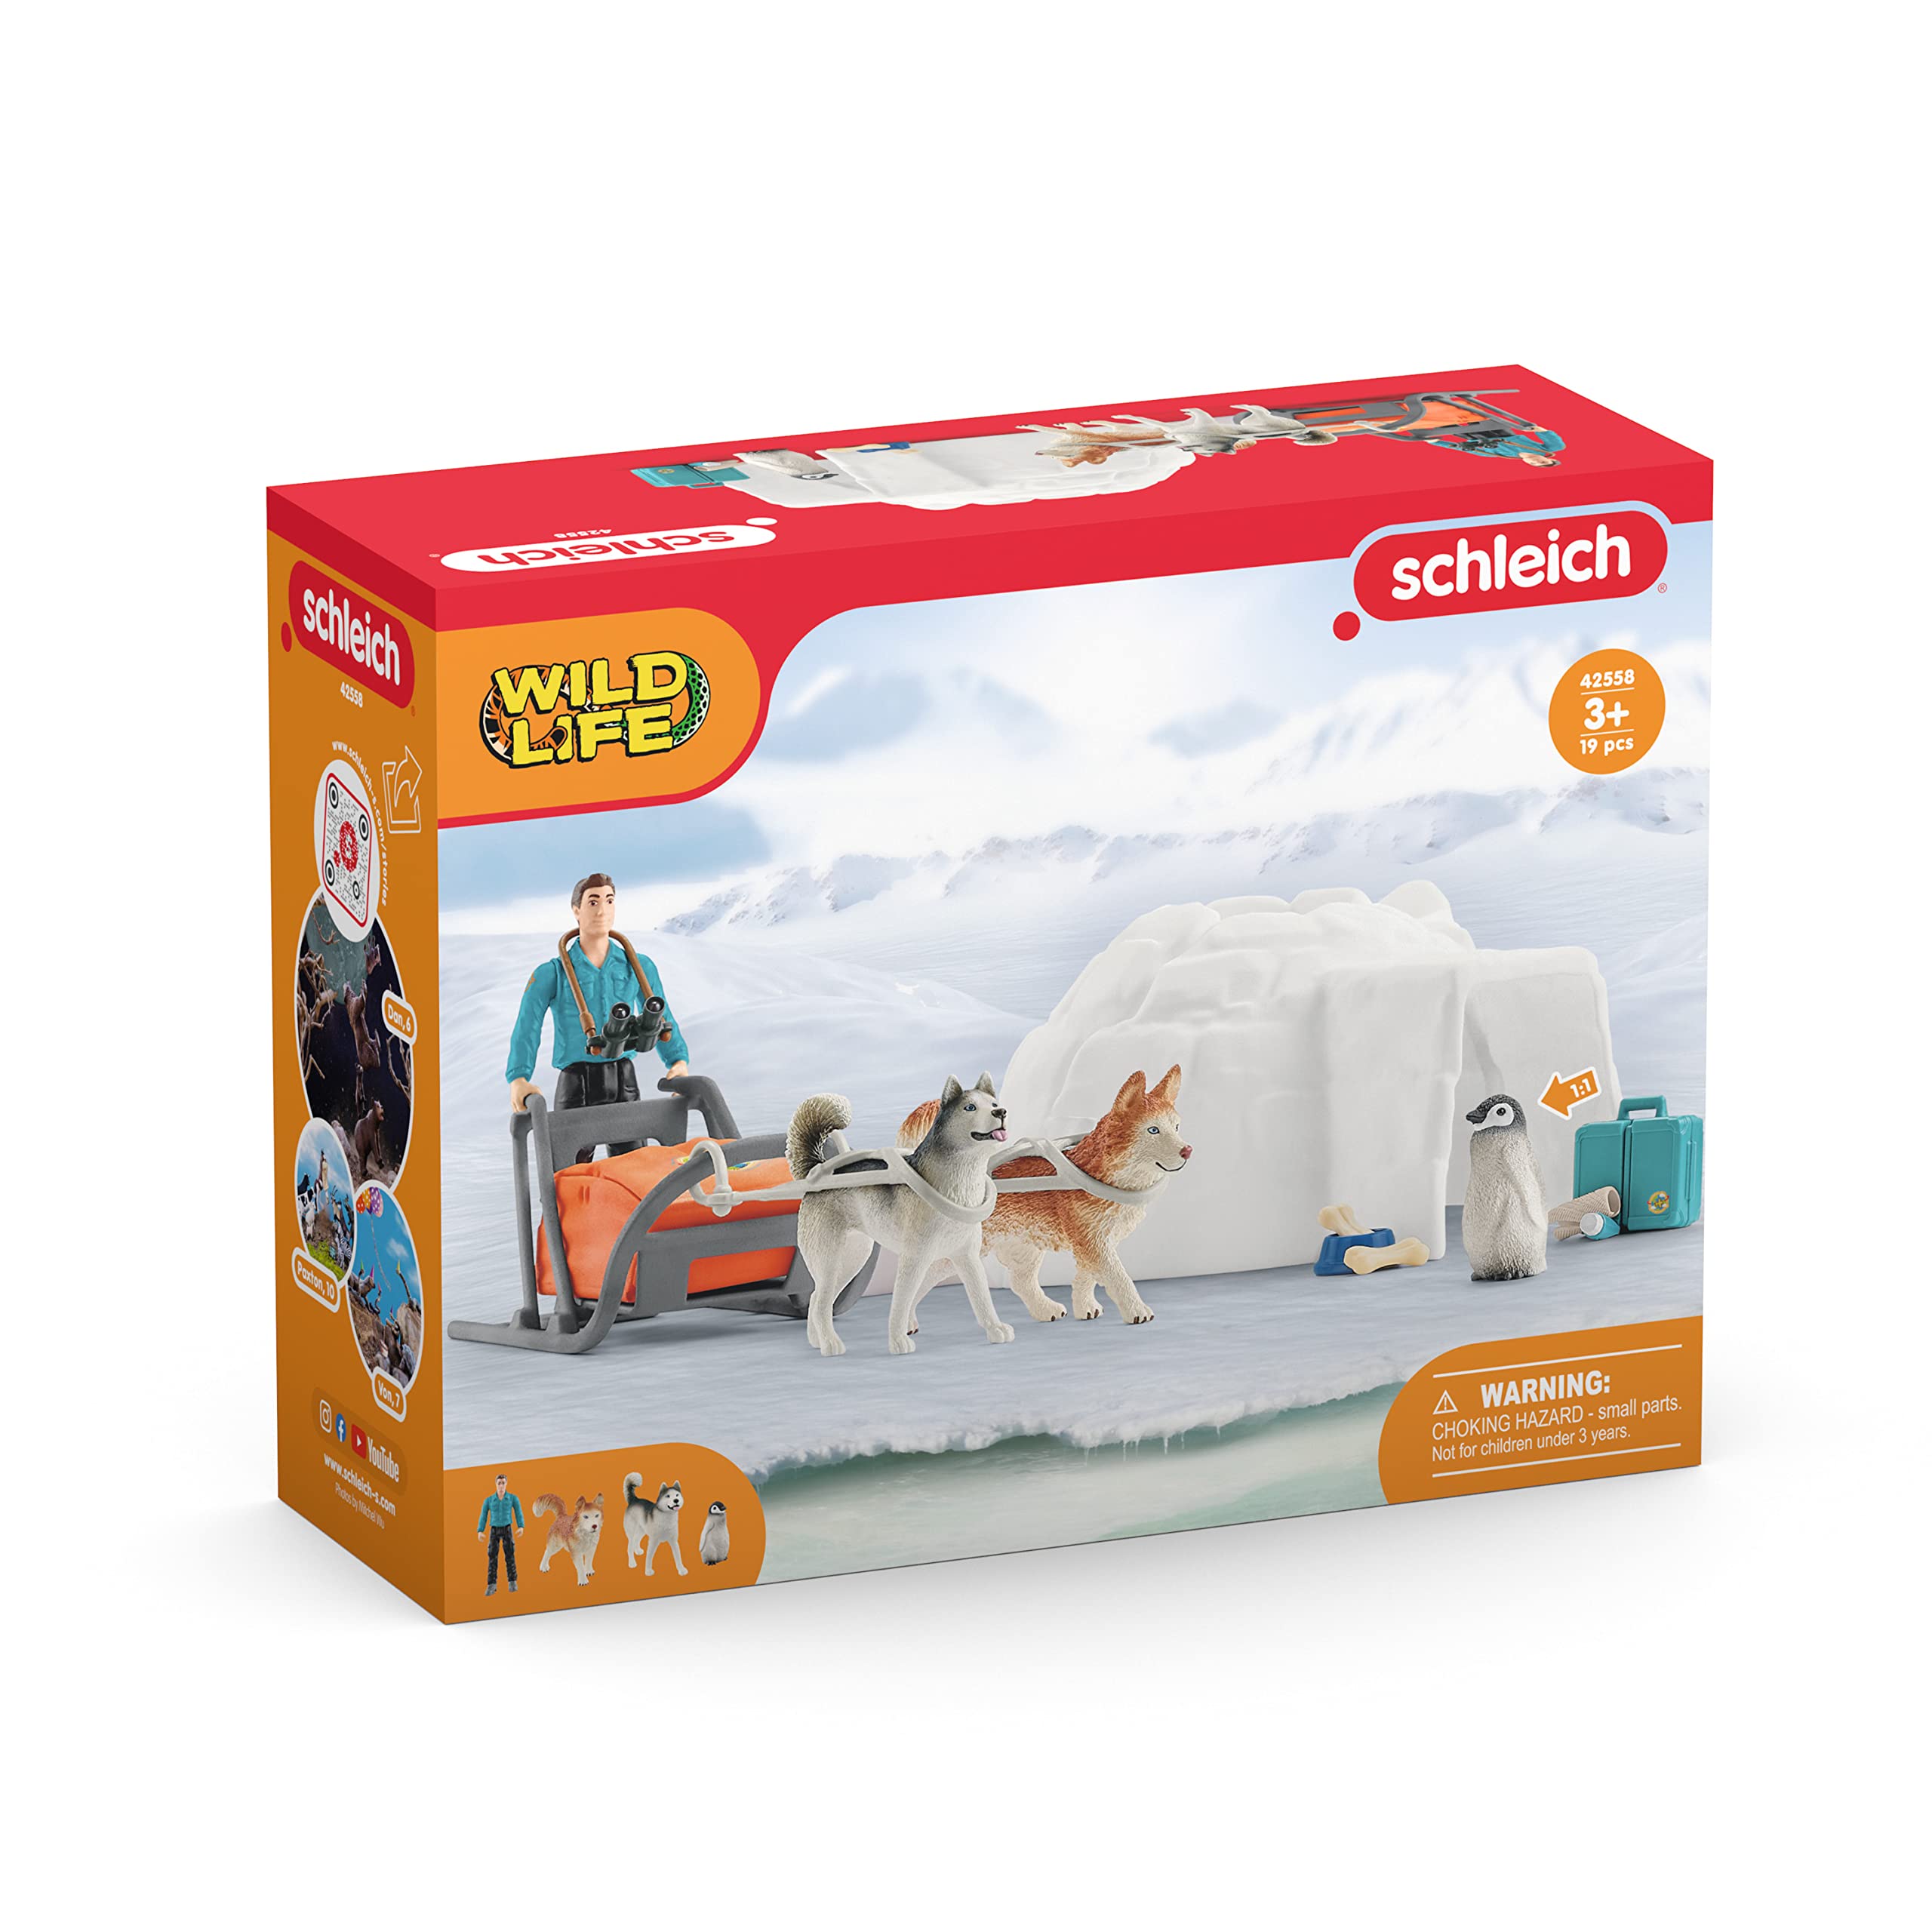 Schleich Wild Life Wild Animal Toy Playset for Boys and Girls Ages 3+, Antarctic Expedition with Arctic Animals